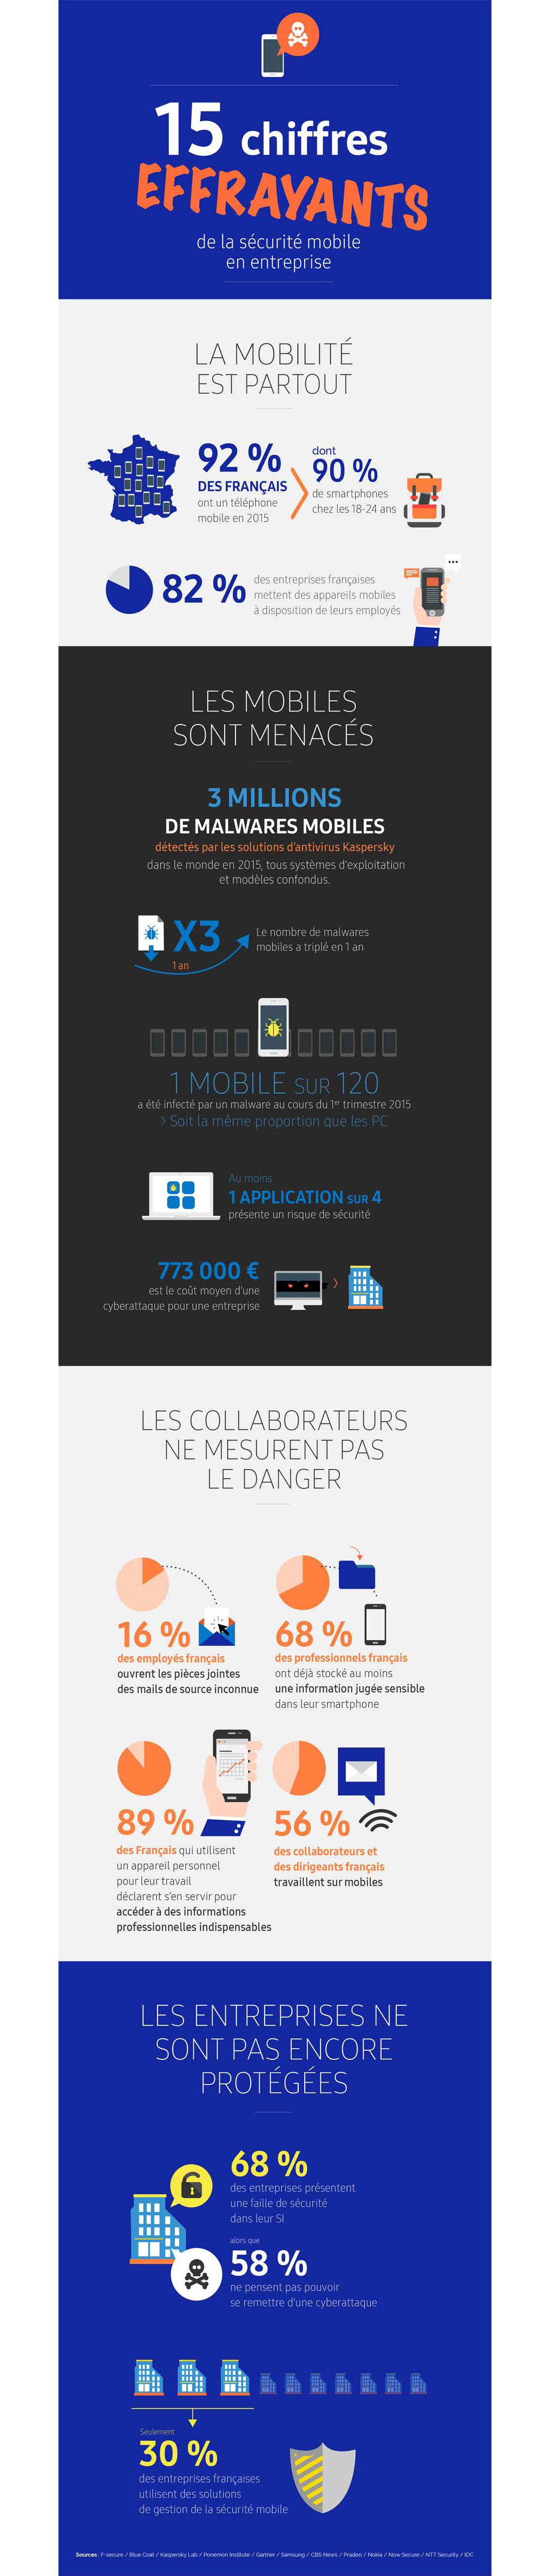 docline-xerox-infographie-securite-mobile-entreprise